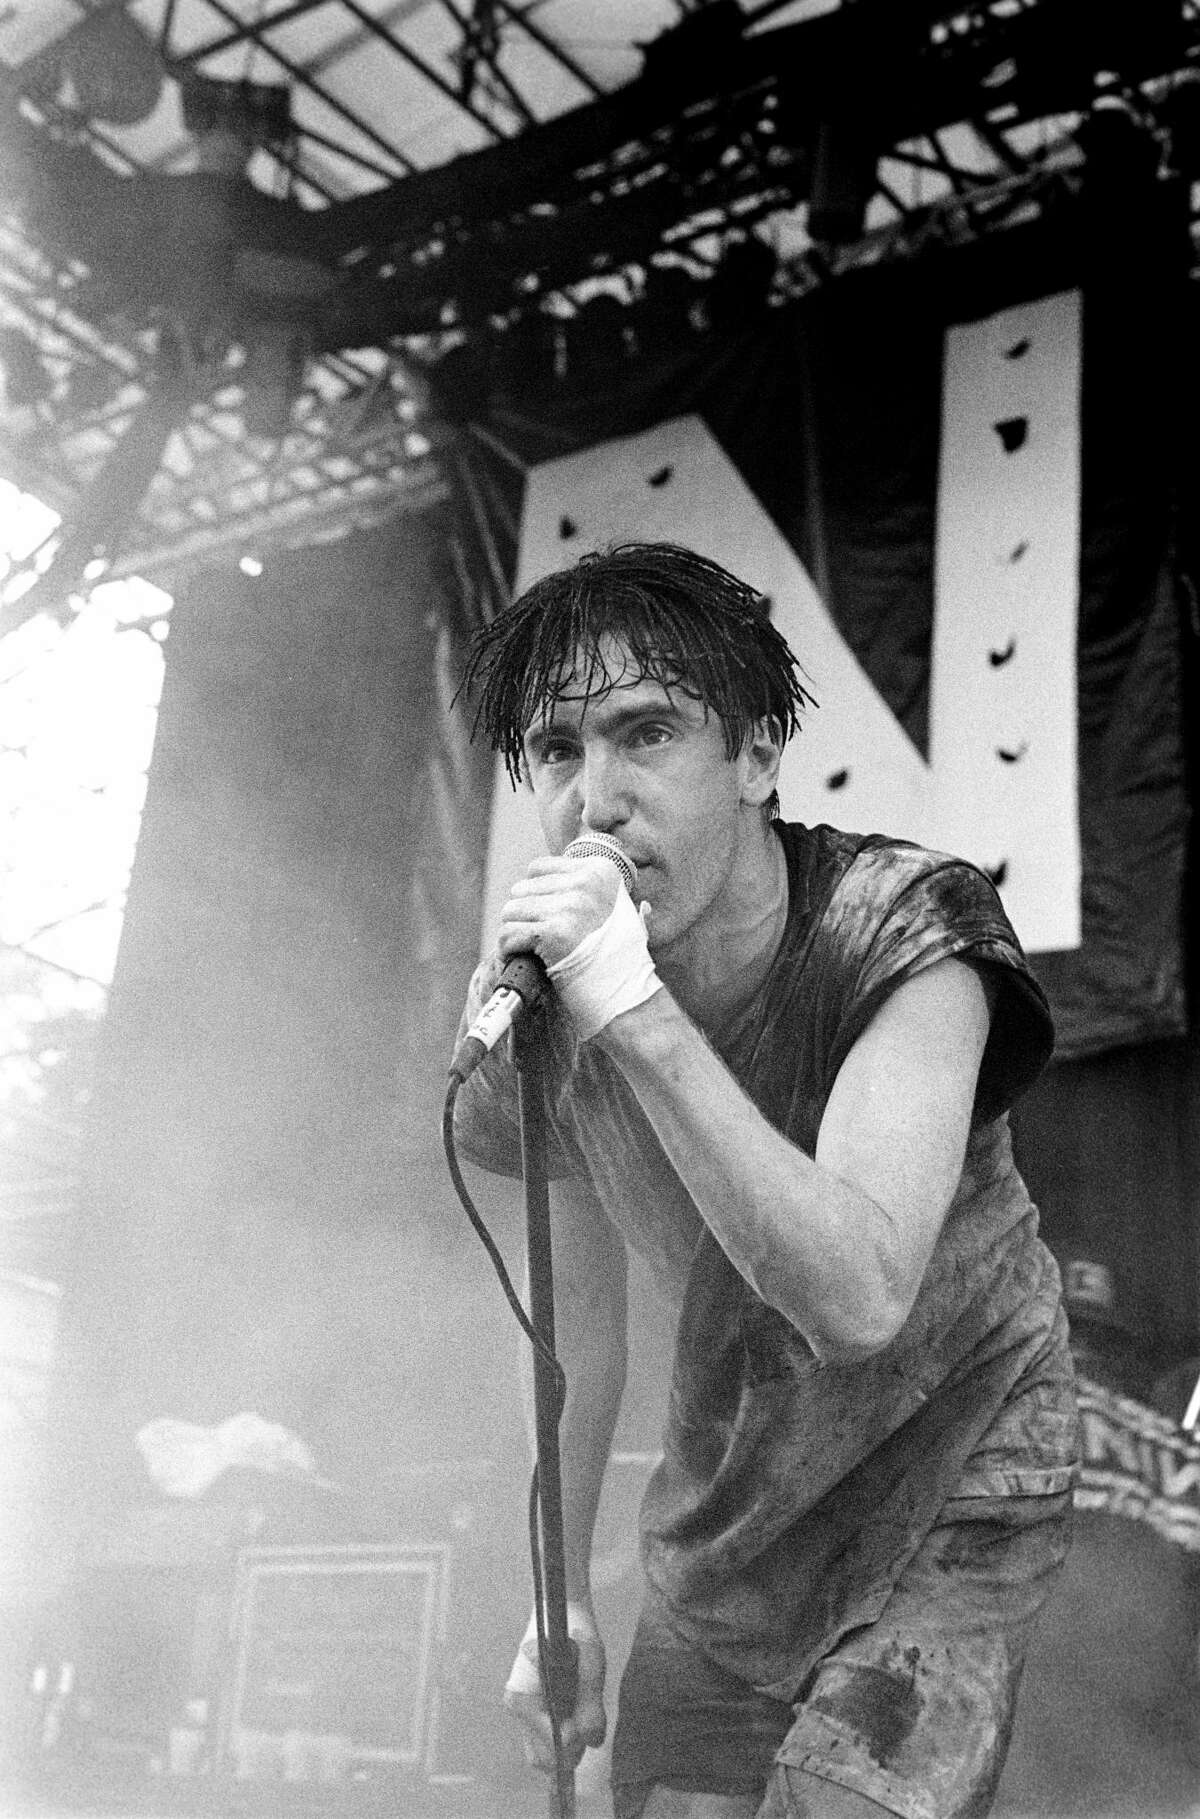 Trent Reznor performing with Nine Inch Nails at Lollapalooza in Waterloo, New Jersey on August 14, 1991. (Photo by Ebet Roberts/Redferns)